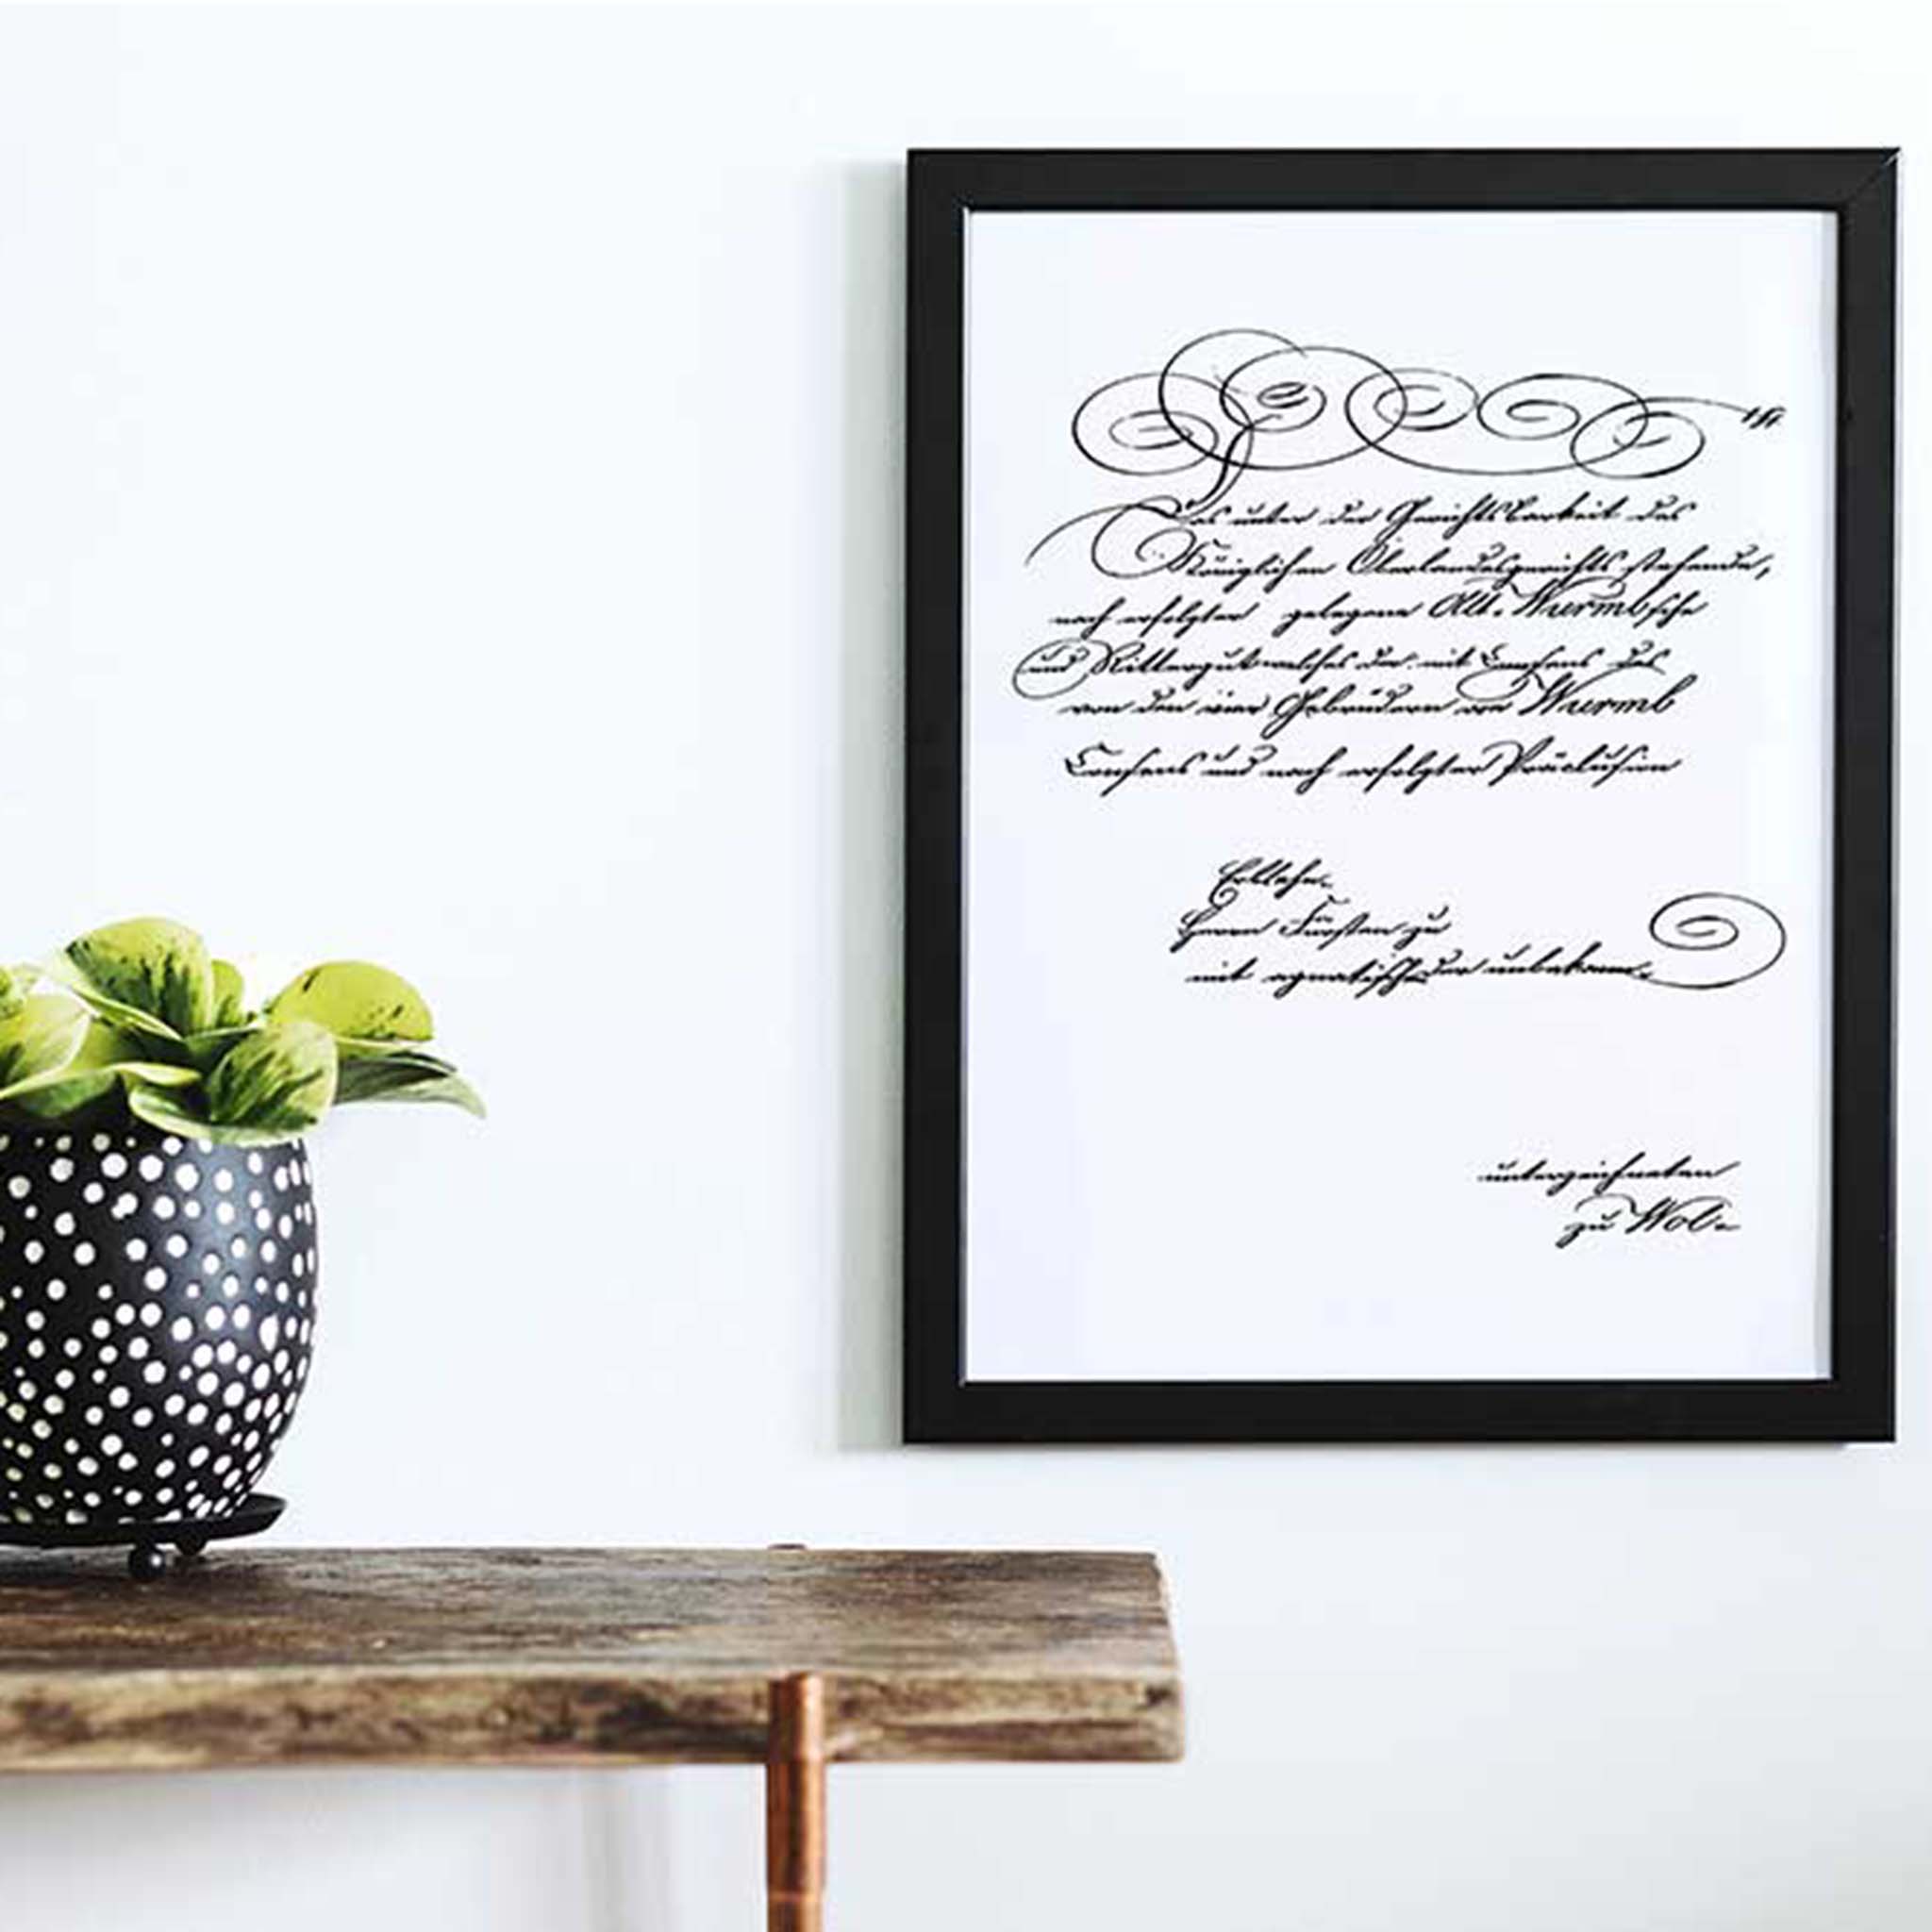 A black photo frame features ReDesign with Prima's Secre Letter small transfer against a white background.